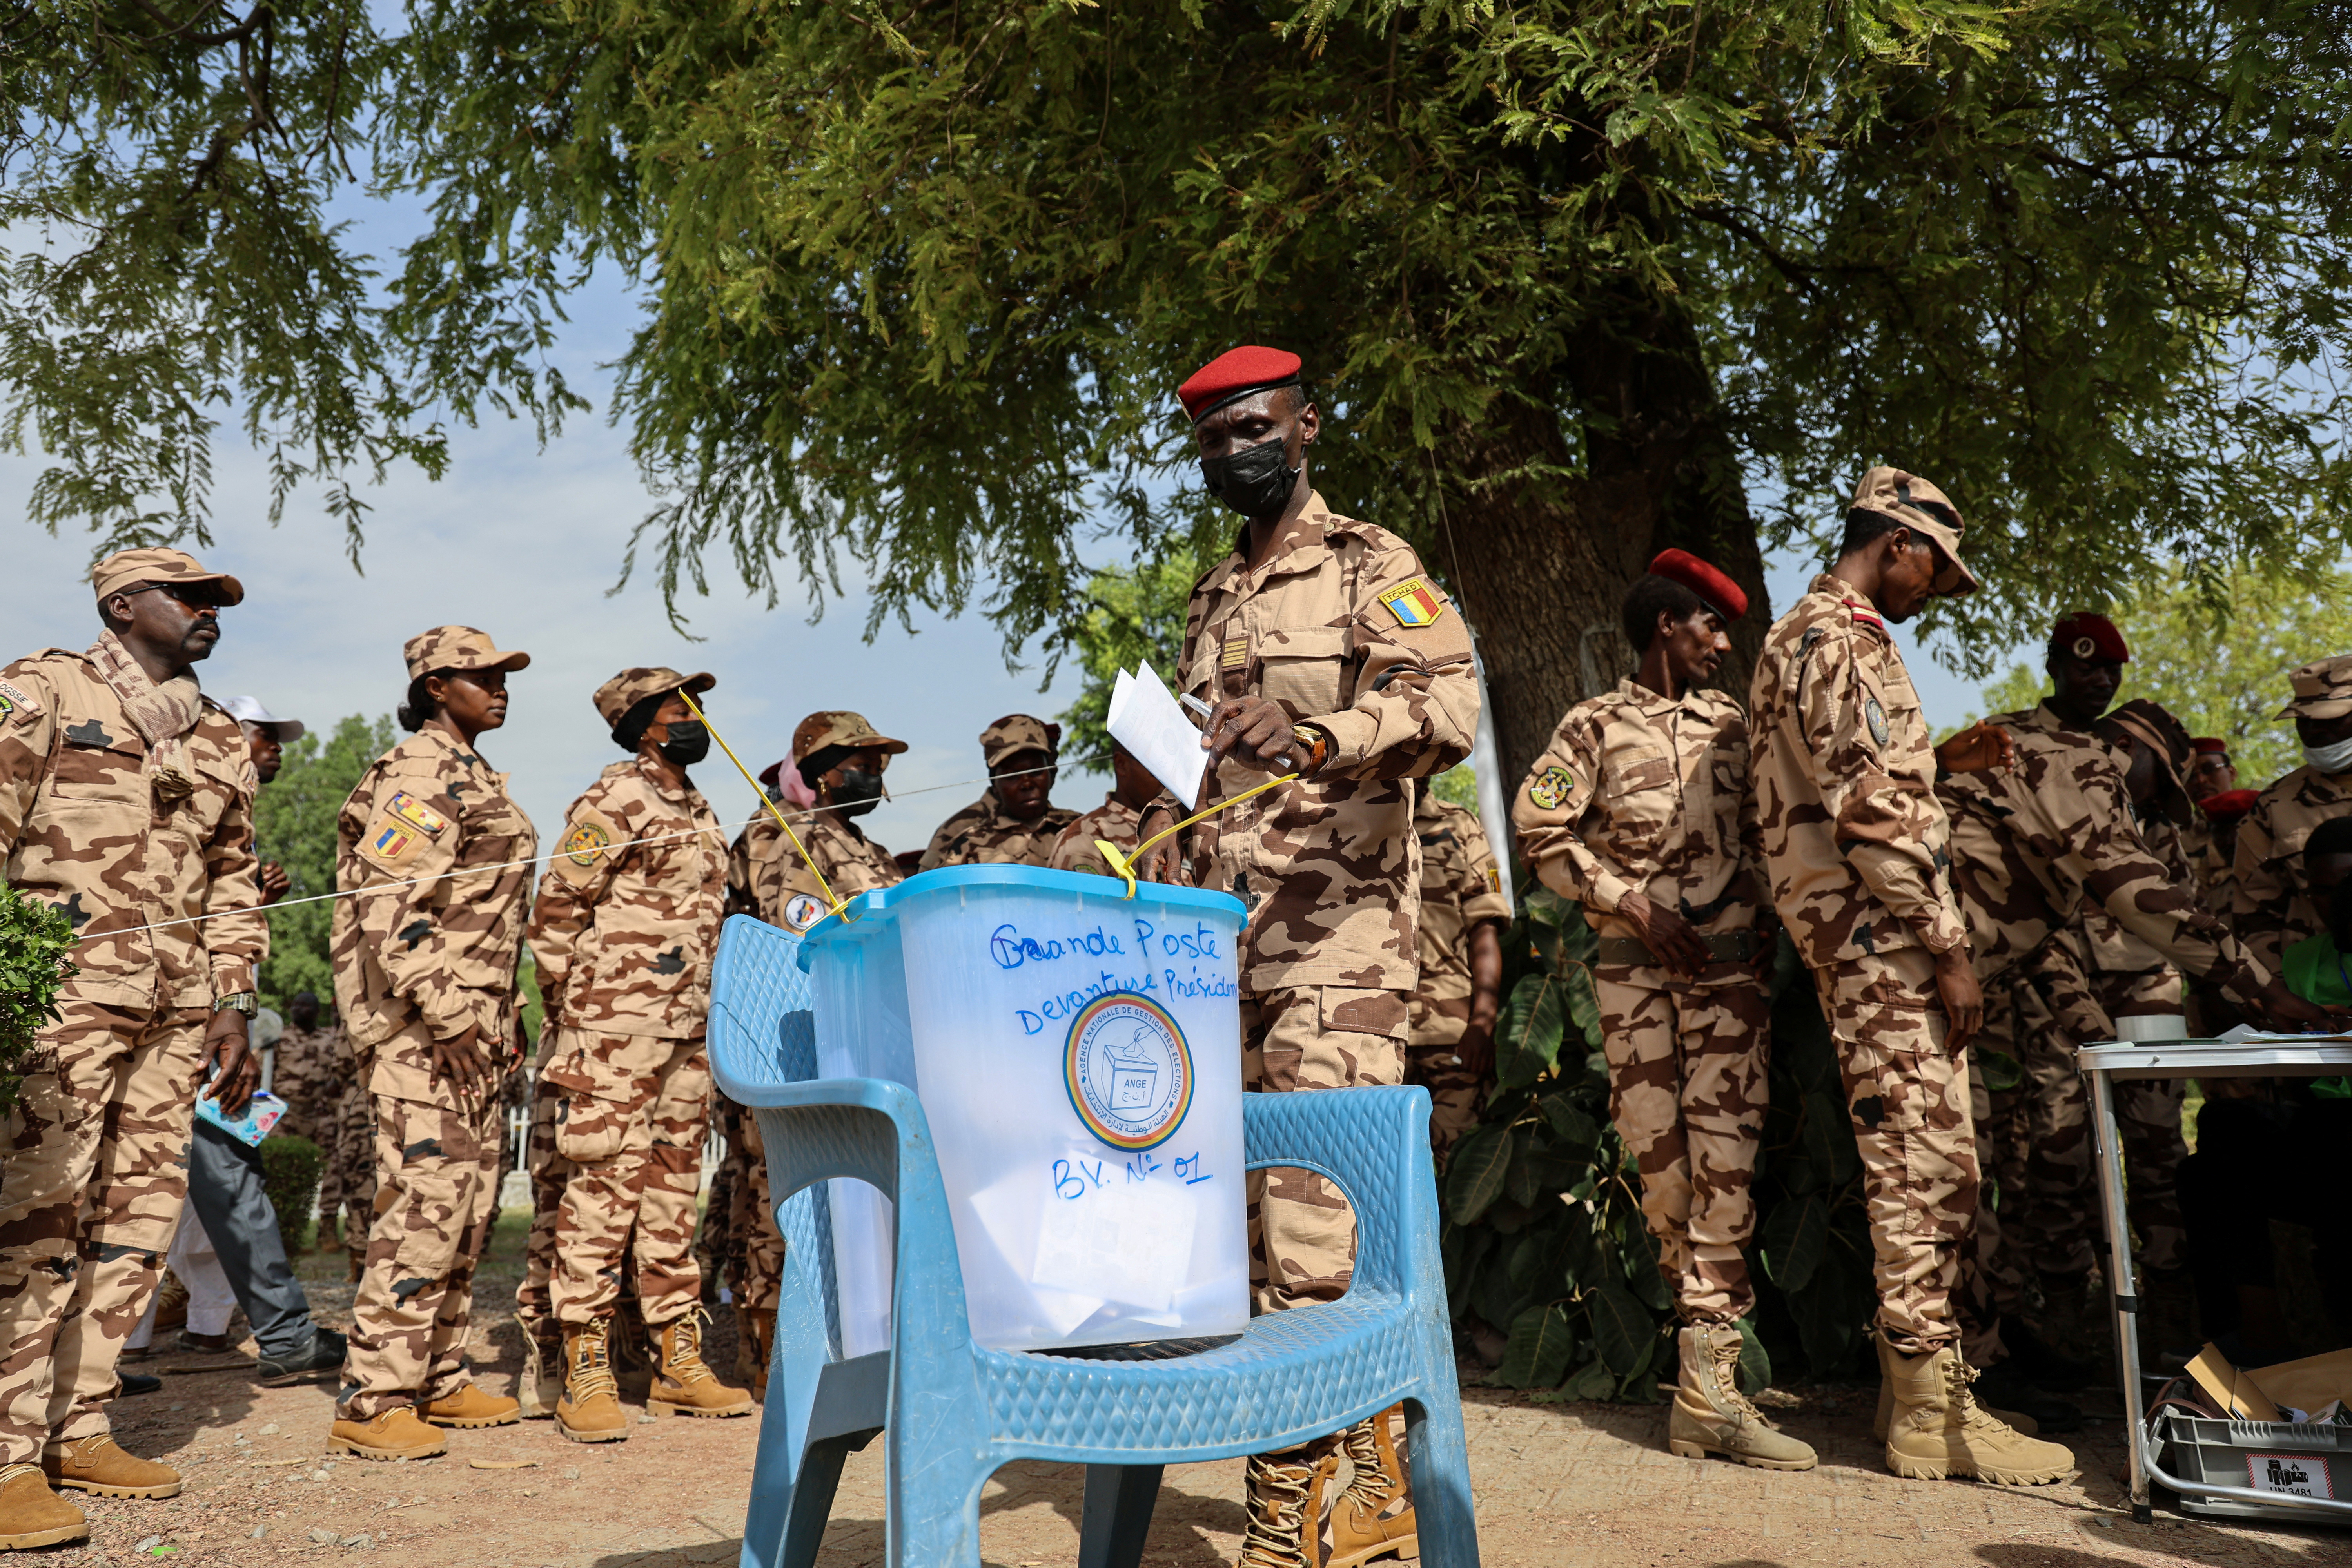 Chad soldiers vote early in the presidential election in N'djamena